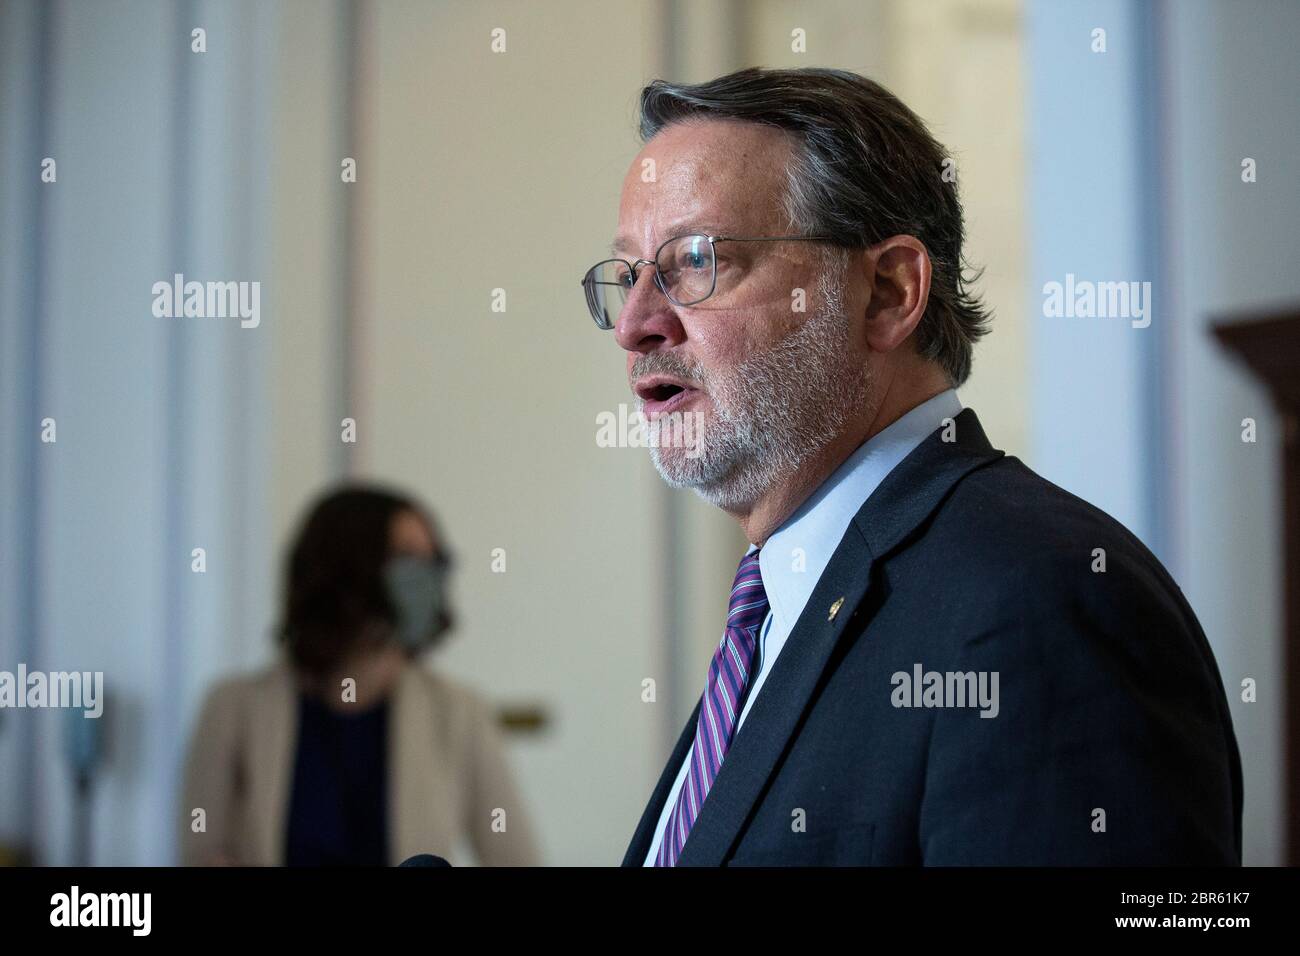 Washington, United States Of America. 20th May, 2020. United States Senator Gary Peters (Democrat of Michigan) speaks to members of the media following a U.S. Senate Committee on Homeland Security and Governmental Affairs meeting in the Senate Russell Office Building in Washington, DC, U.S., on Wednesday, May 20, 2020, to consider a motion to issue a subpoena to Blue Star Strategies. Credit: Stefani Reynolds/CNP Photo via Credit: Newscom/Alamy Live News Stock Photo